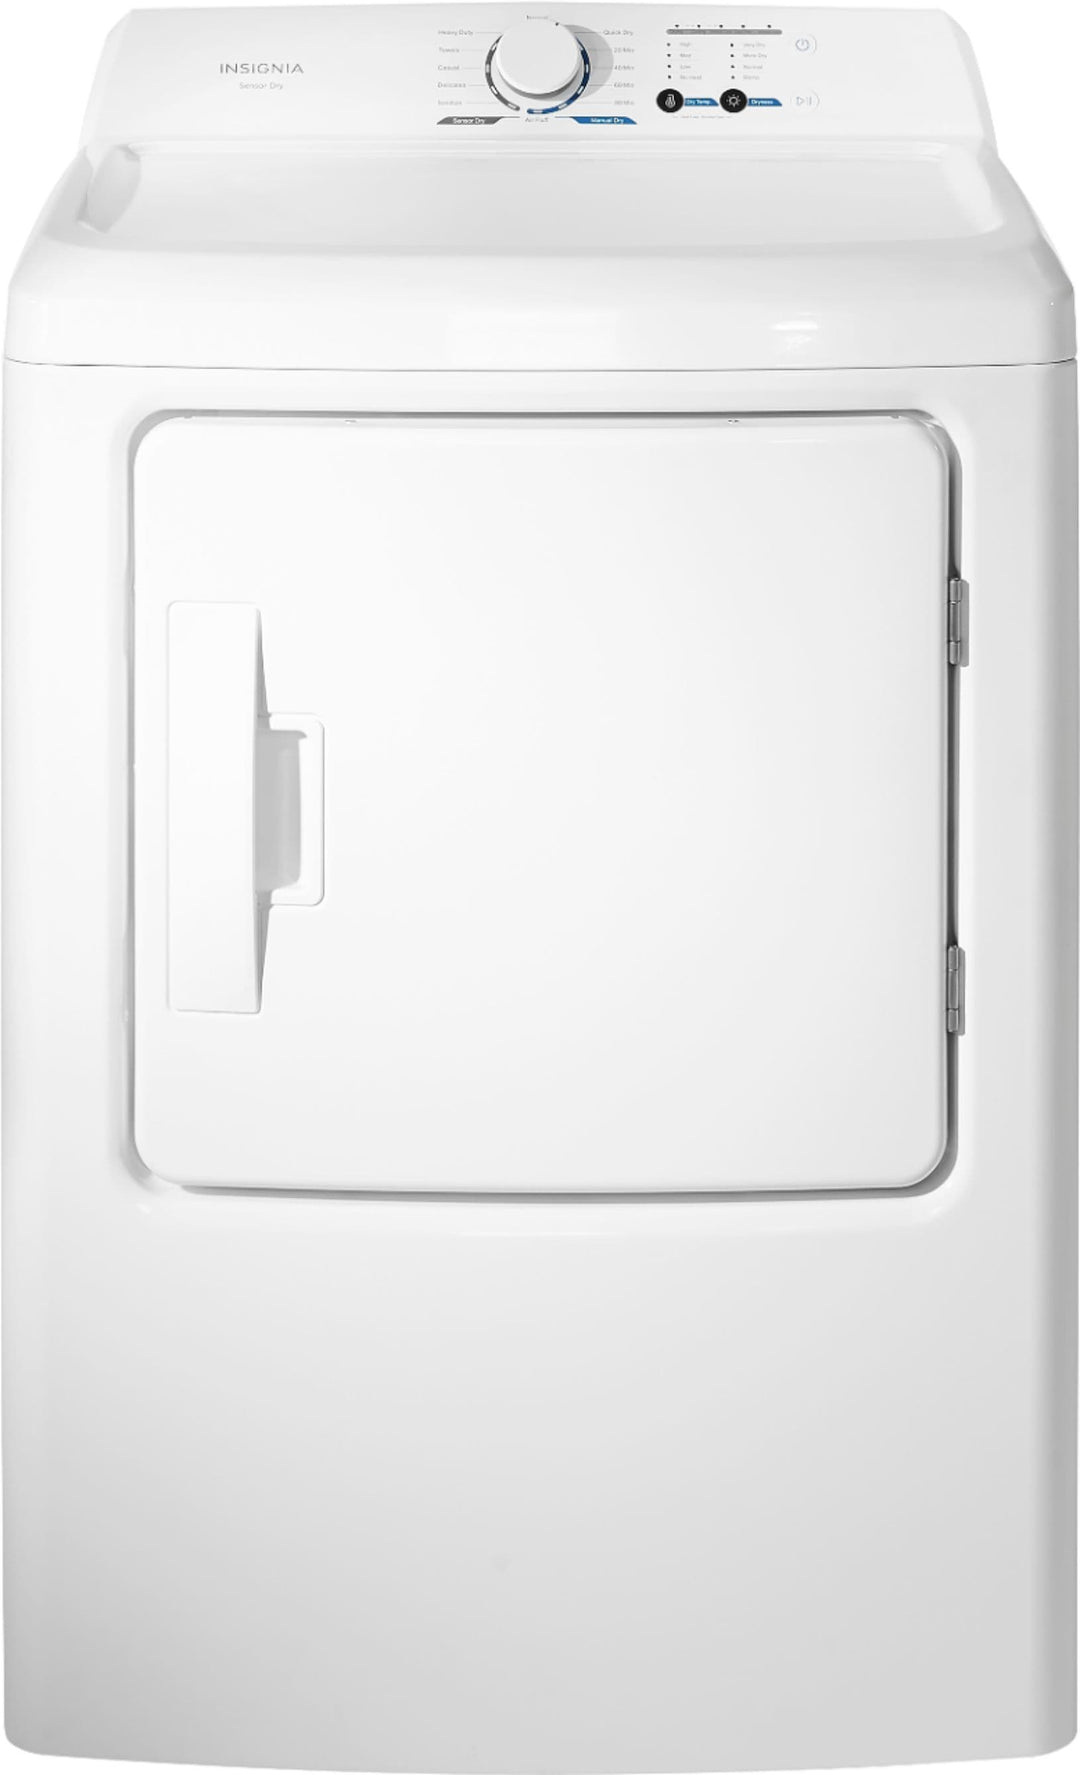 Insignia™ - 3.7 Cu Ft Top-Loading Washer & 6.7 Cu Ft Electric Dryer Bundle - White